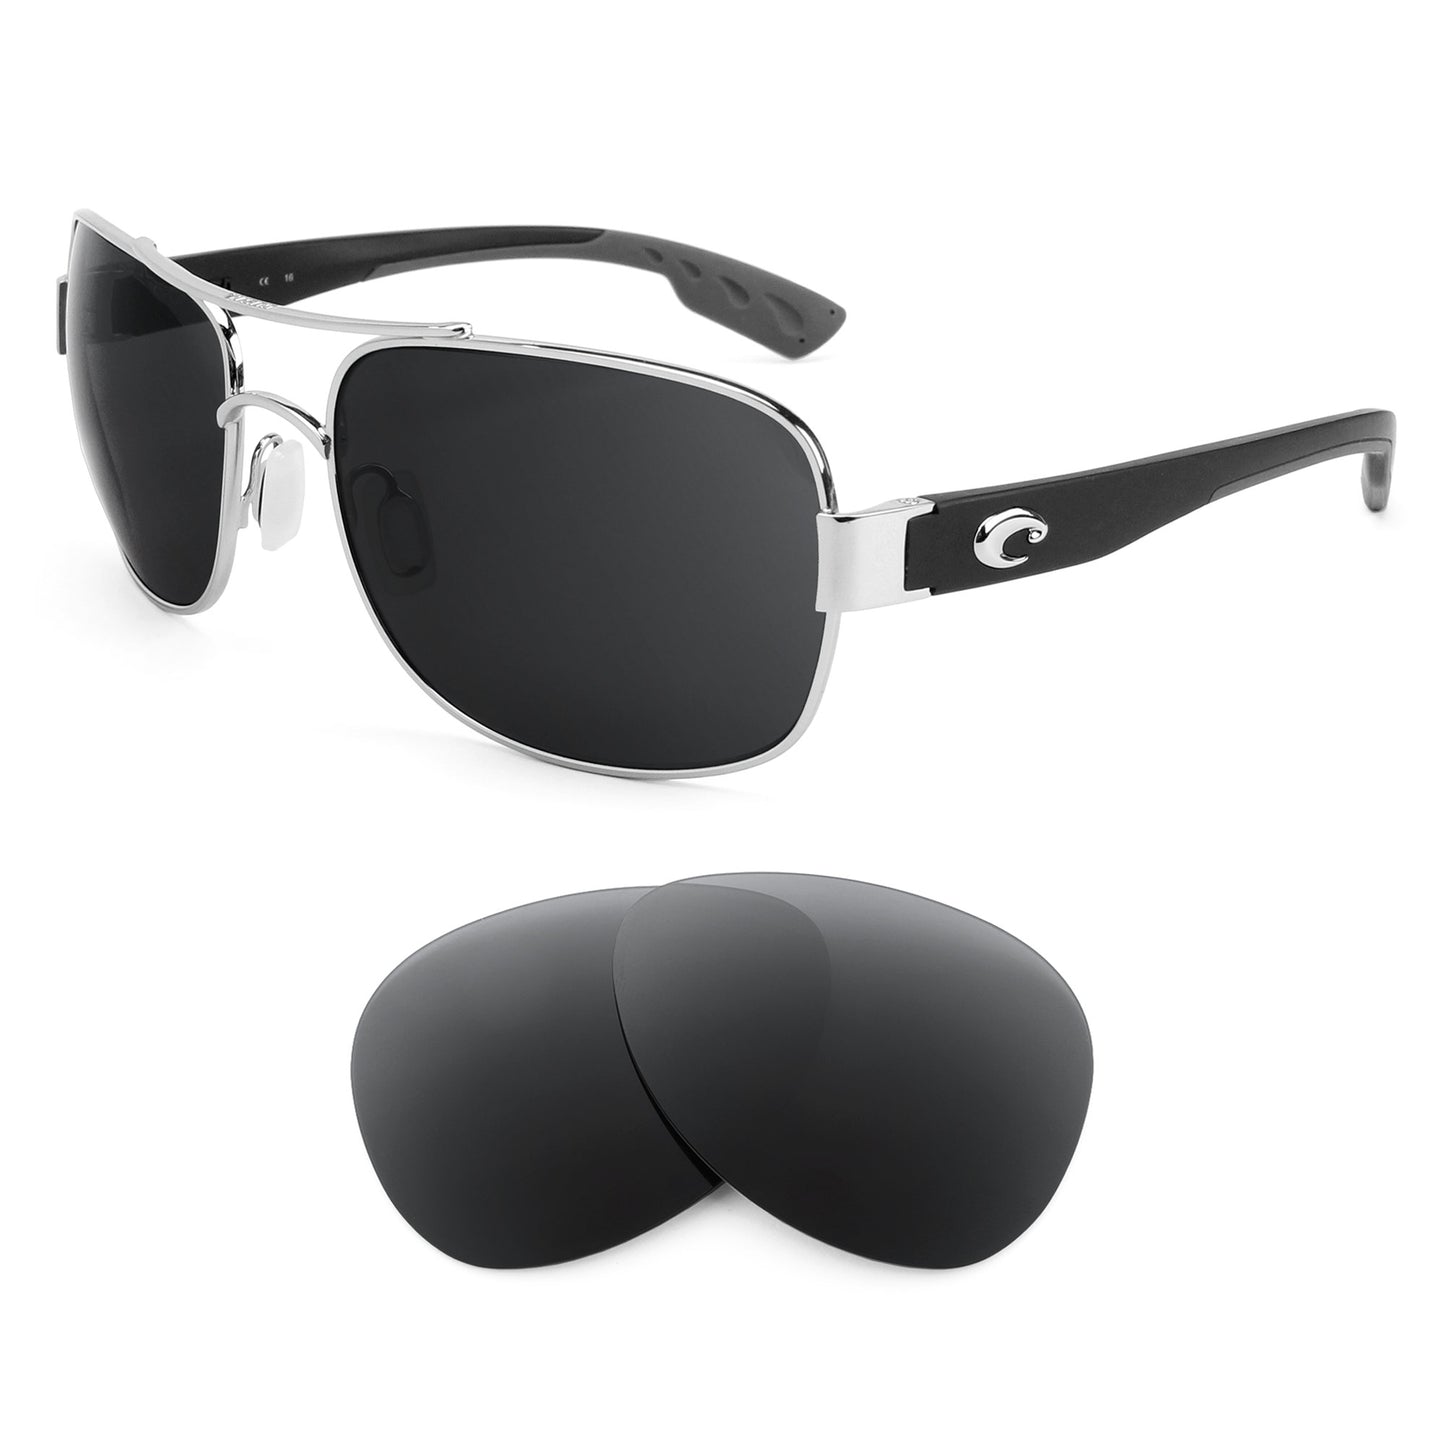 Costa Cocos sunglasses with replacement lenses